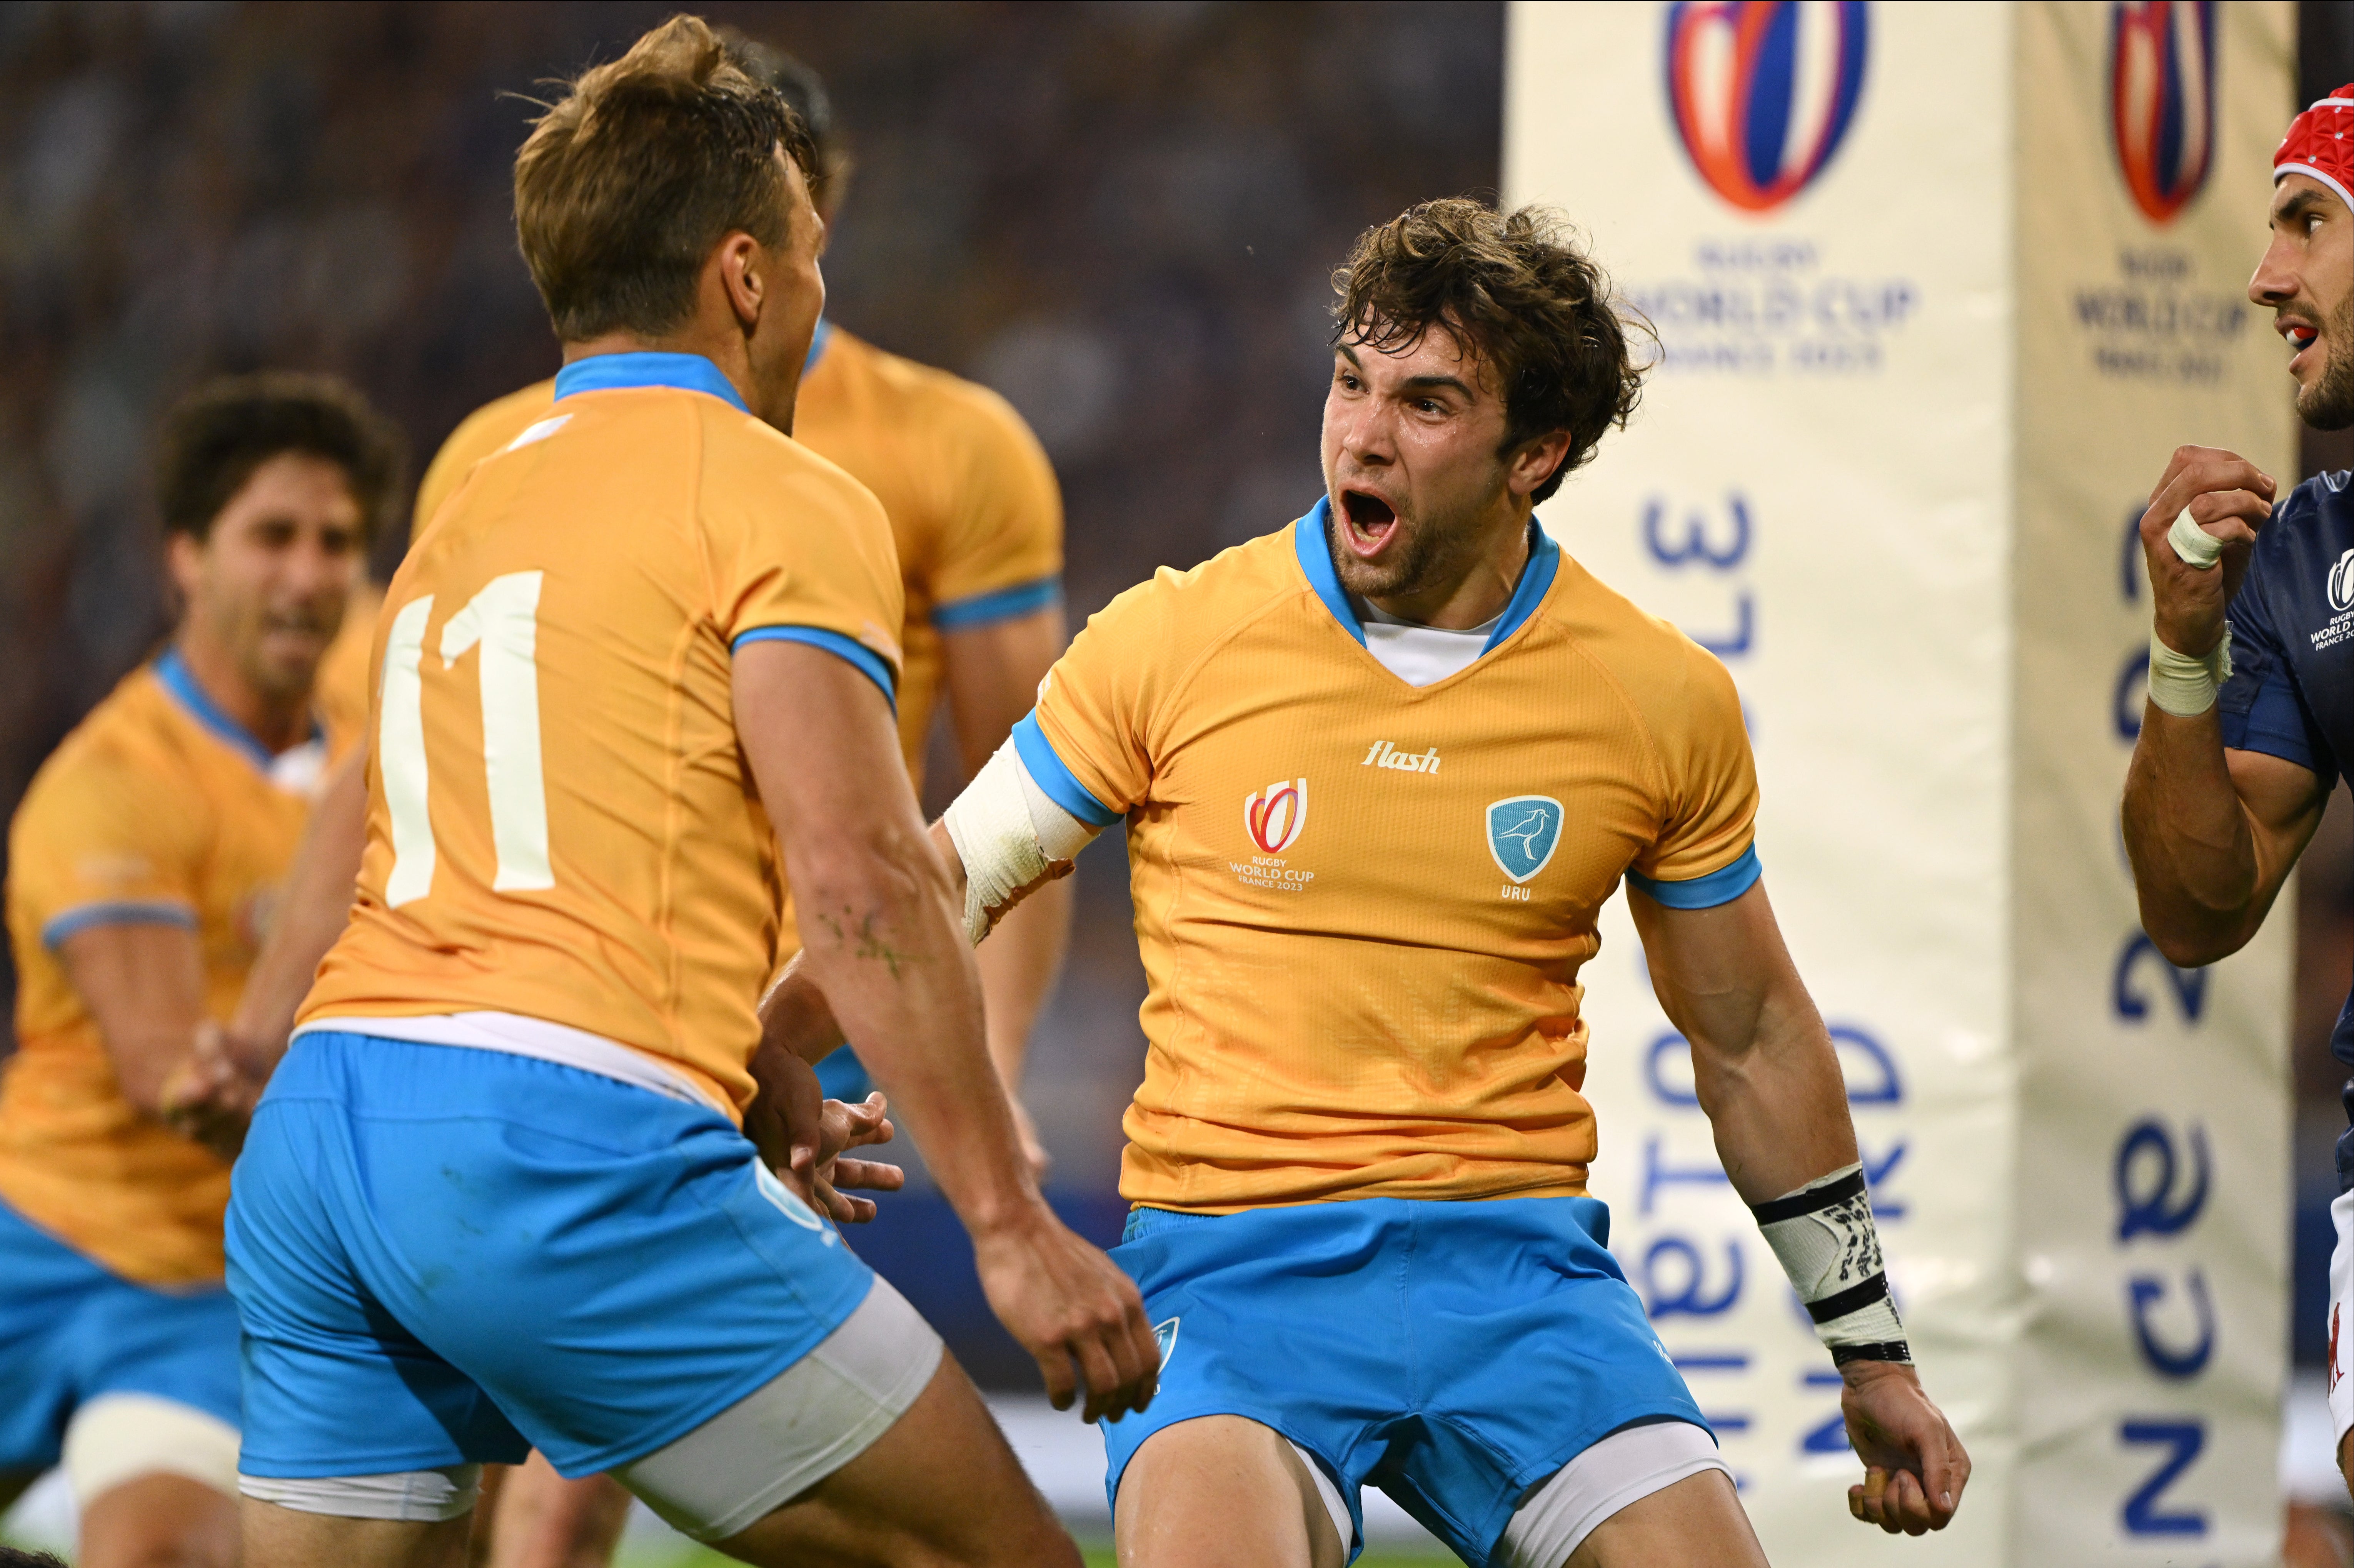 Felipe Etcheverry of Uruguay celebrates during the match against France, though the try would be ruled out